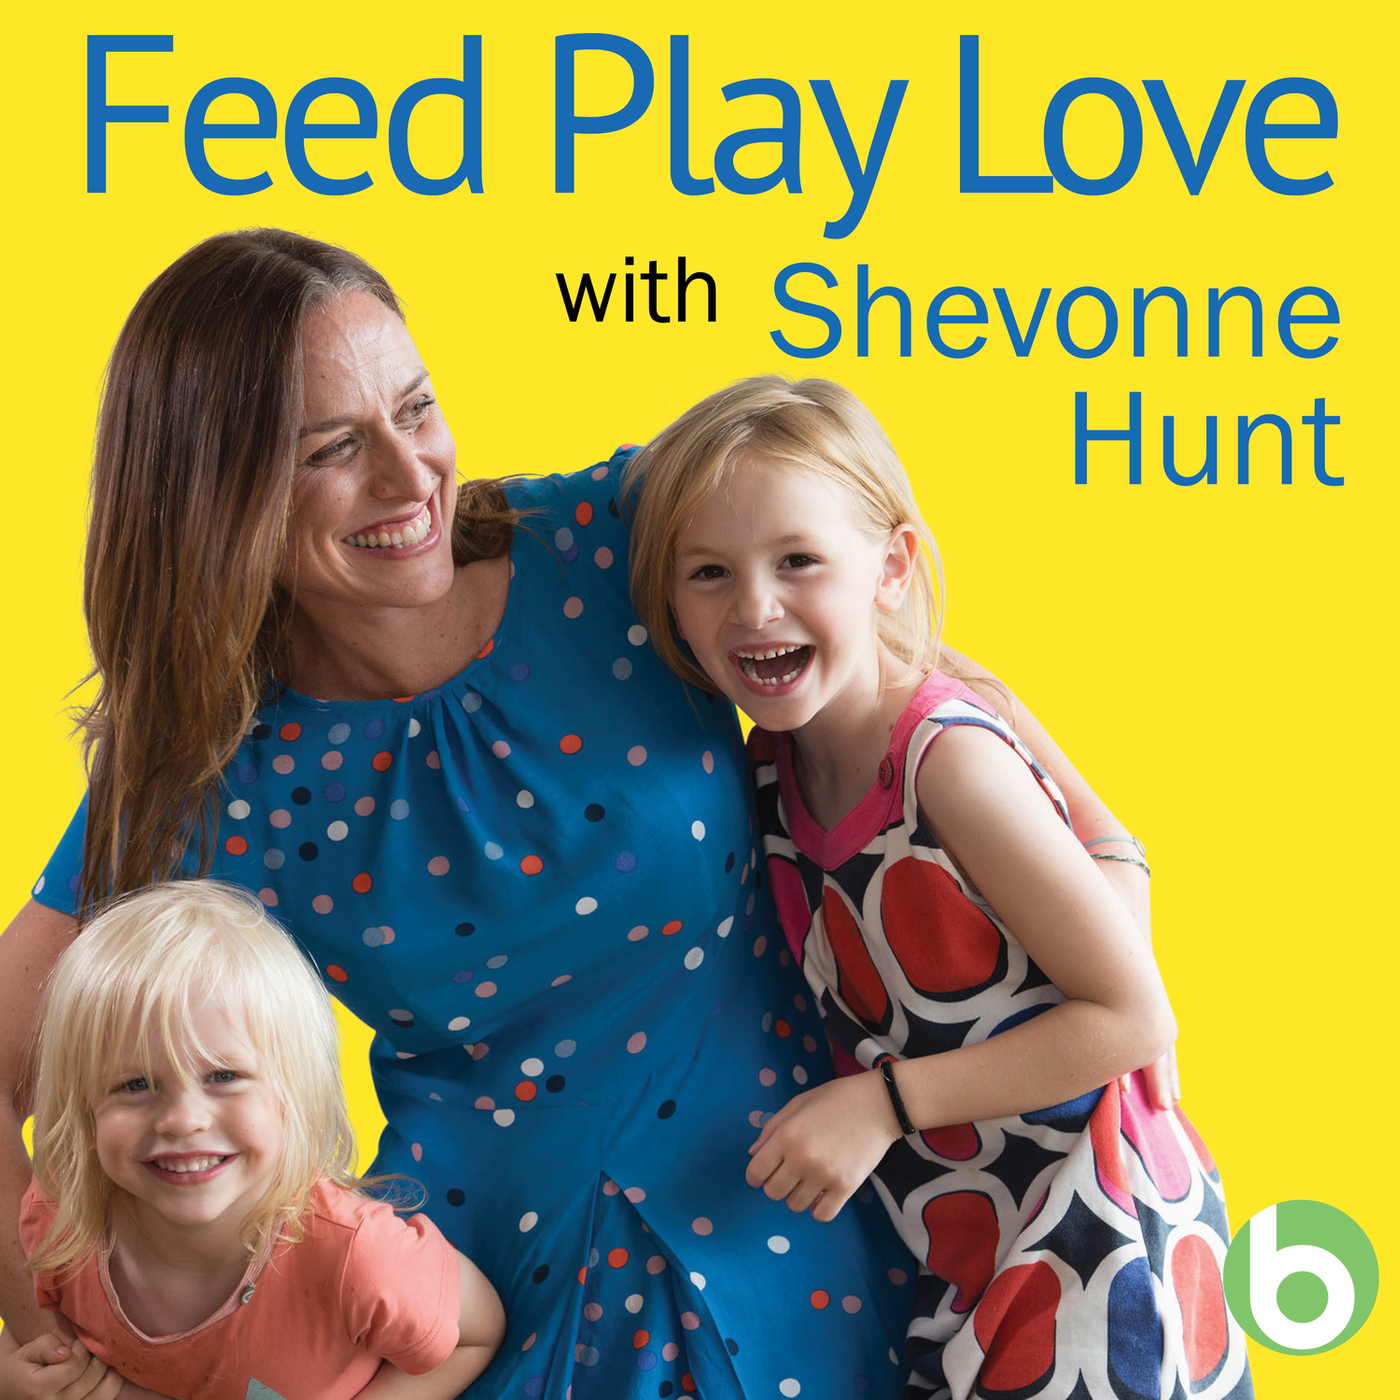 Feed Play Love Highlight: How to deal with whining kids